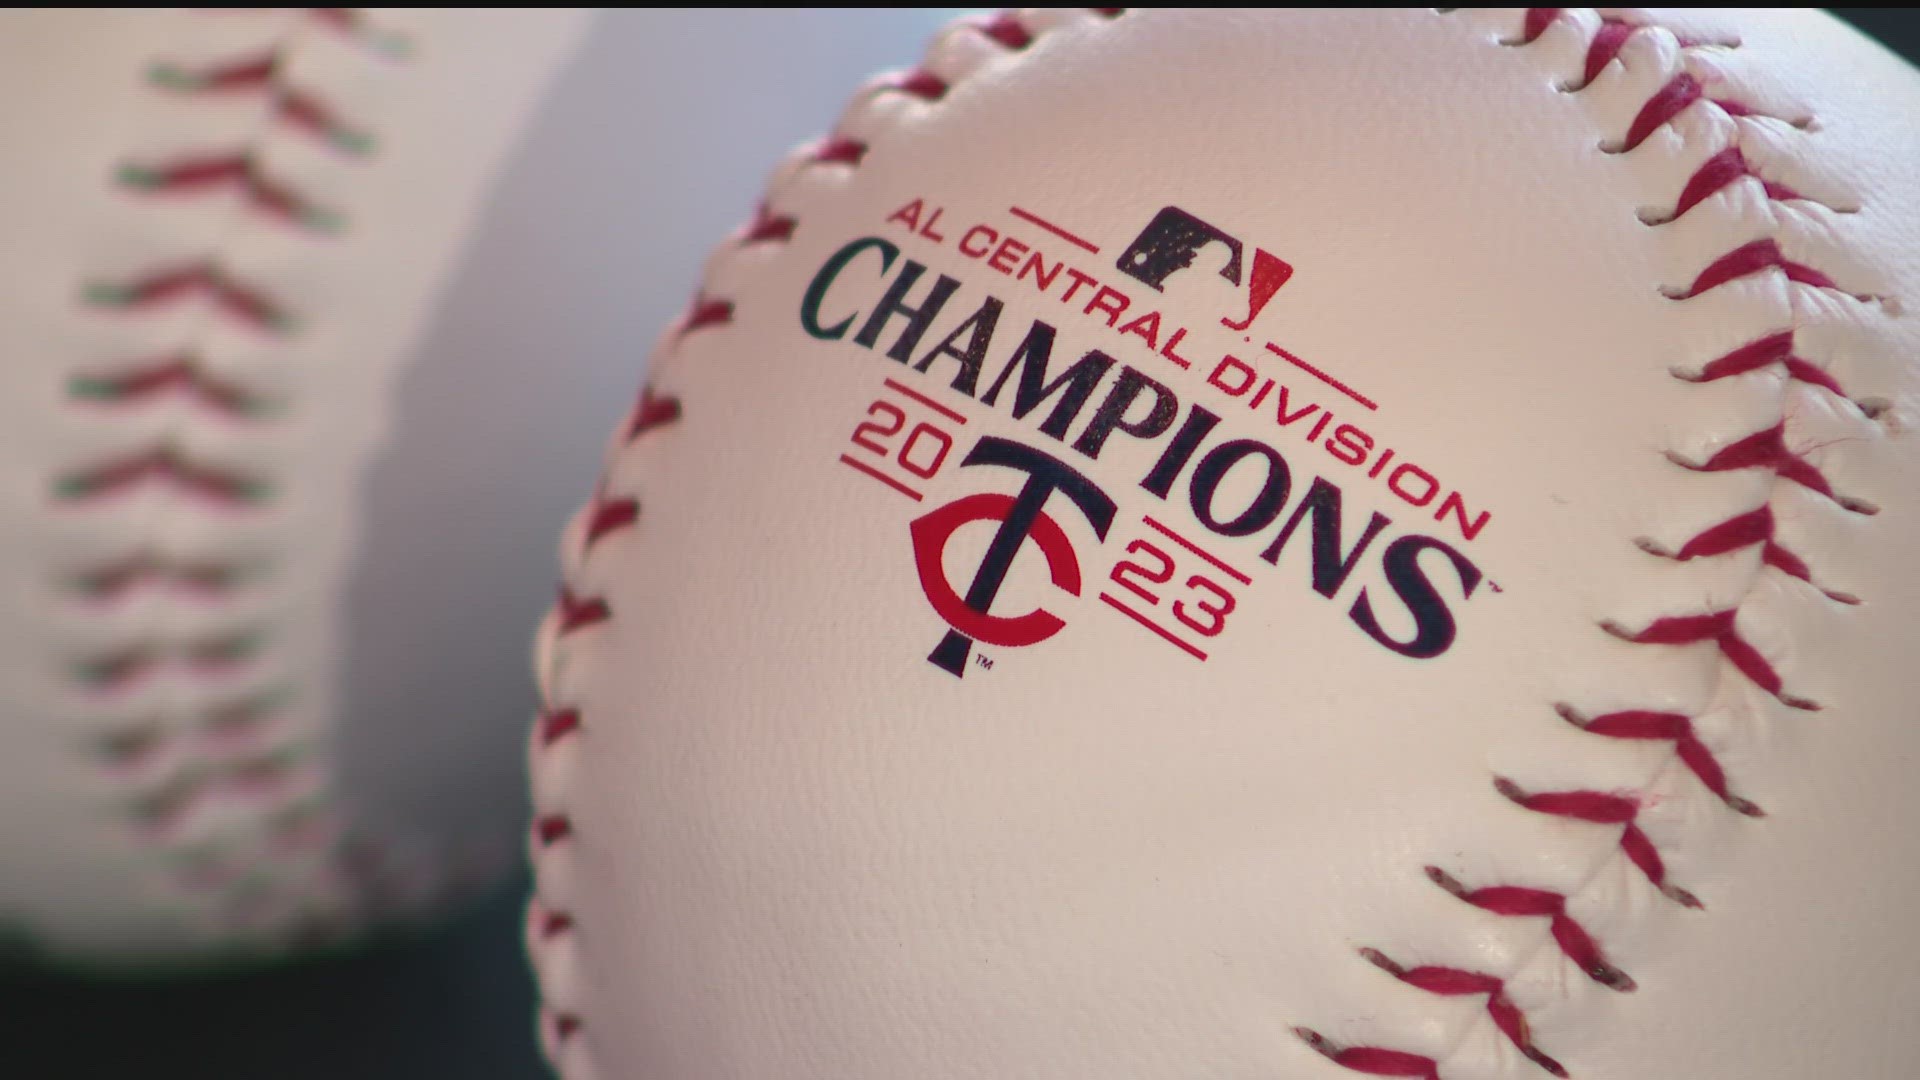 From gate giveaways to appearances by famous former Twins, check out what's happening at Target Field in the first round of the postseason.